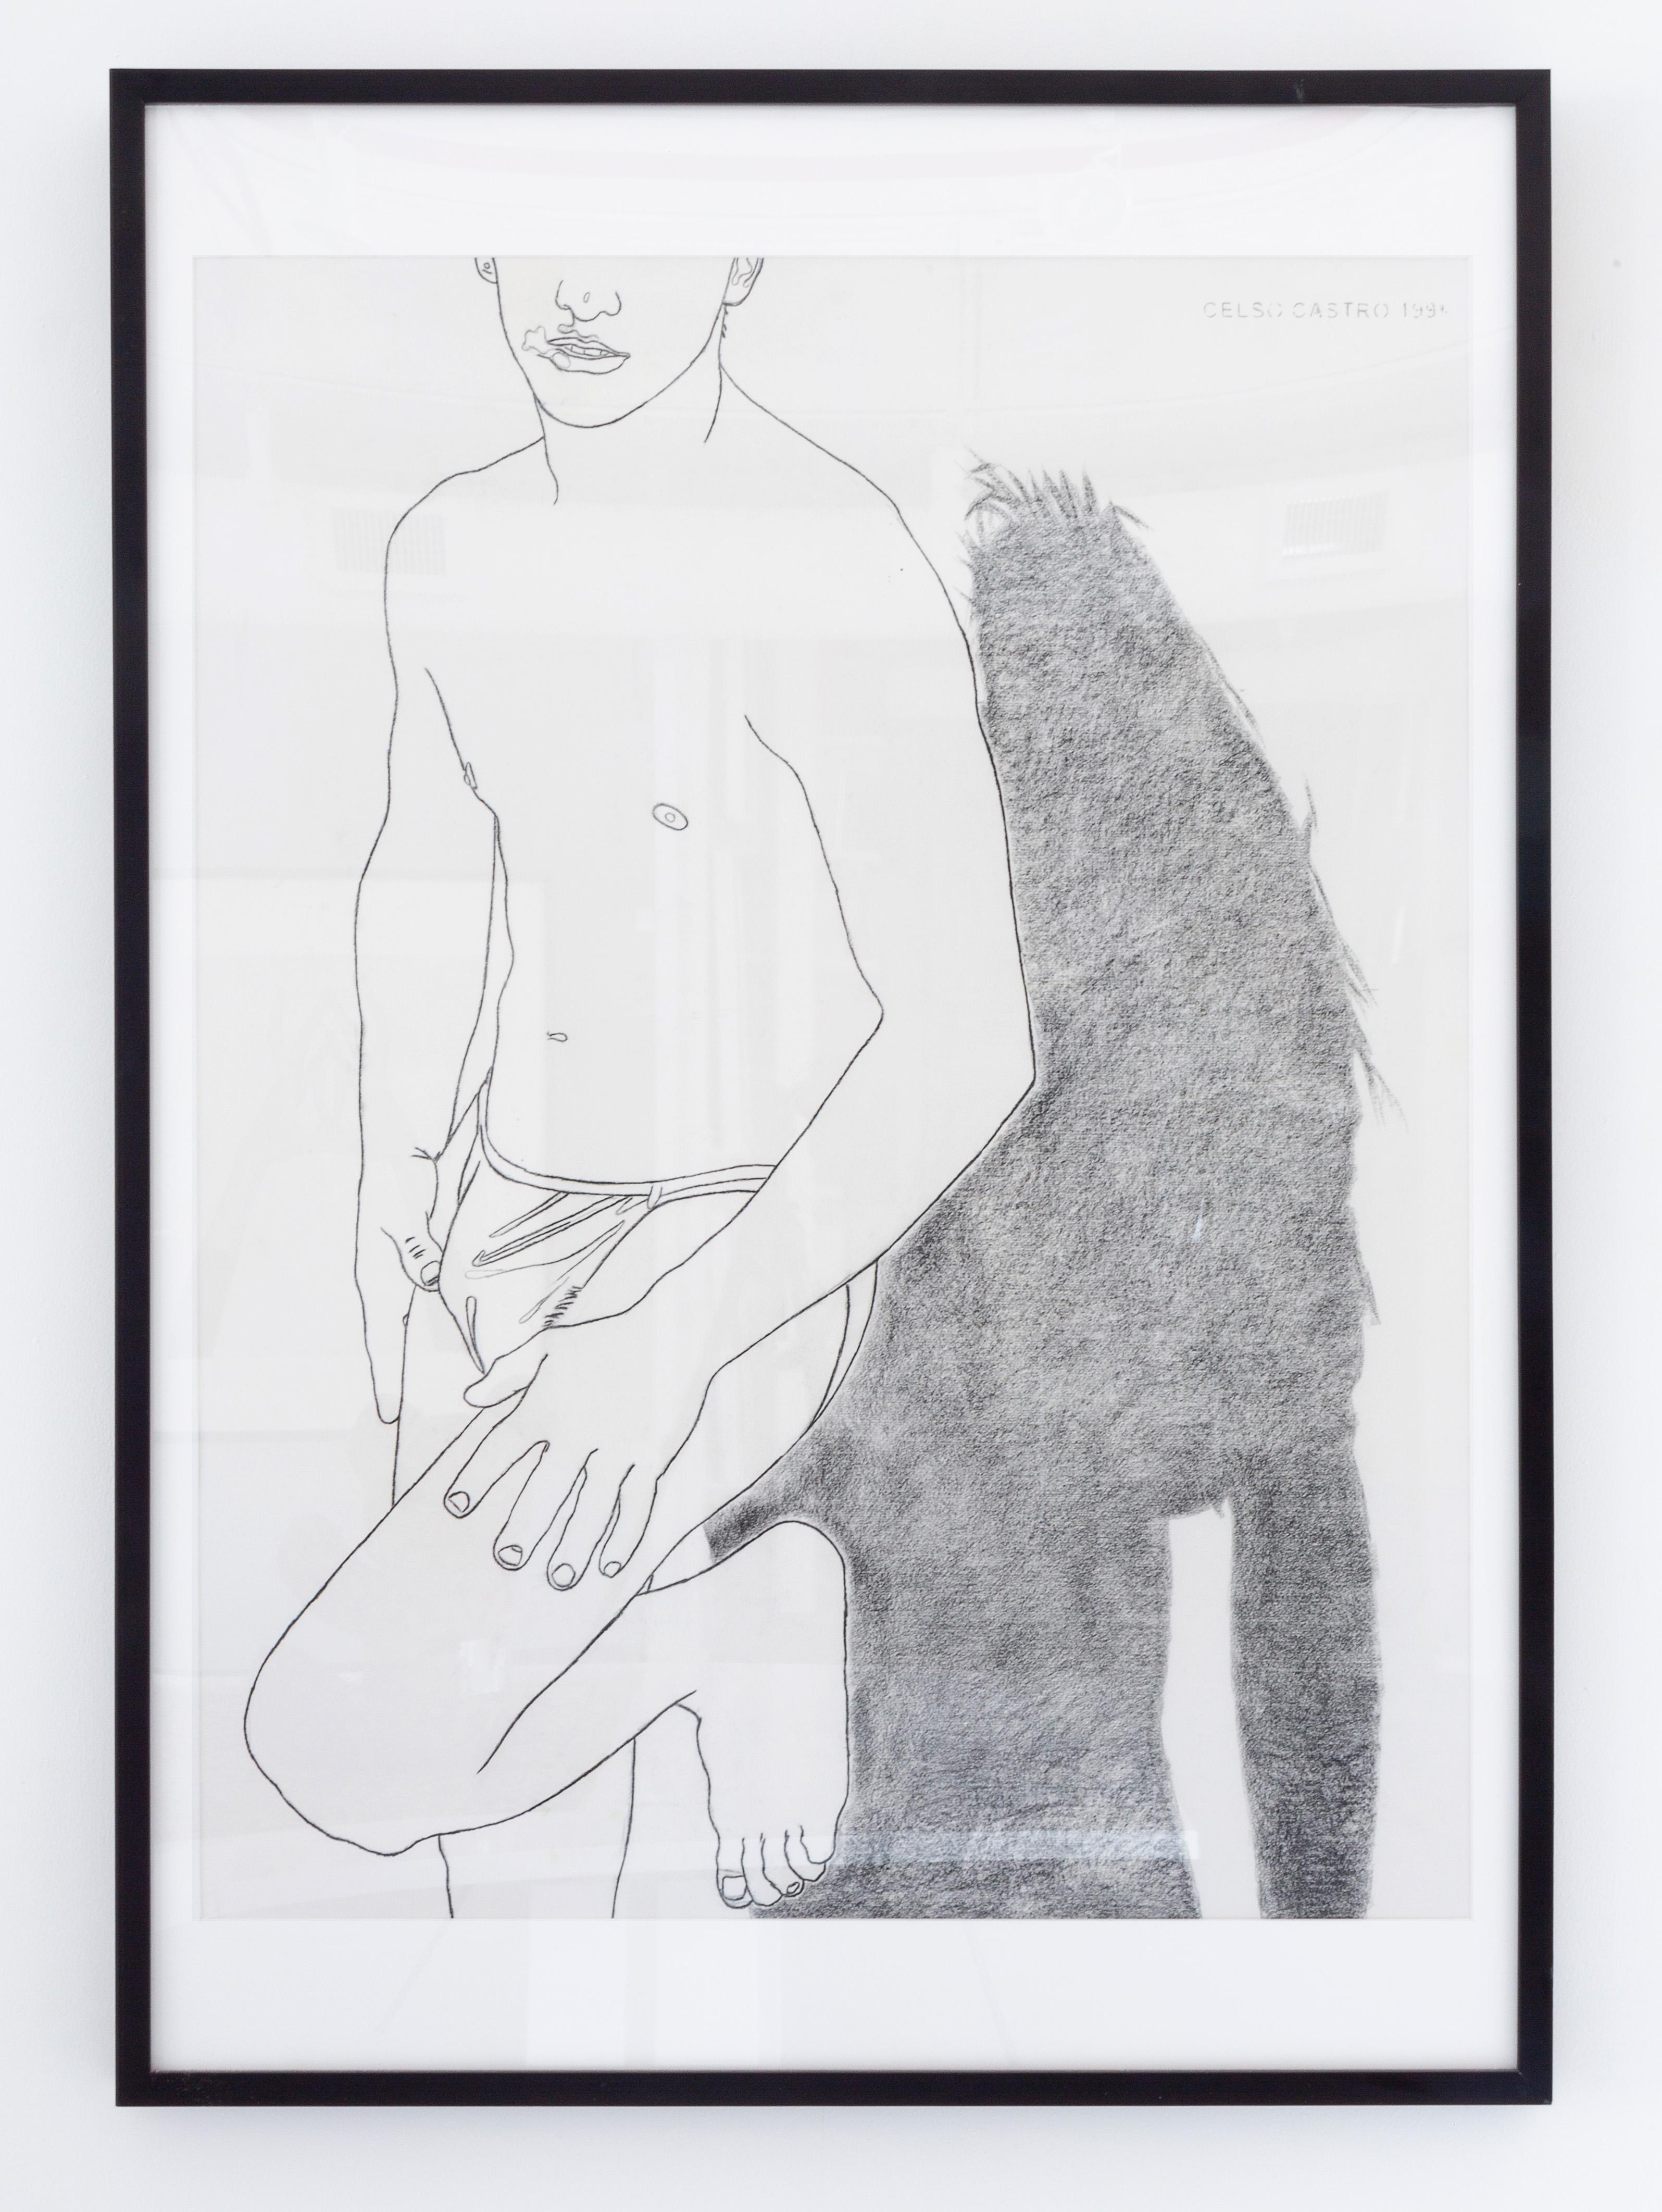 Untitled- Portrait, 1997 by Celso Castro-Daza
Pencil or archival paper
Image size: 48 H in. x 36.5 in. W 
Framed: 58 H x 41 in. W 2 in. D

Drawing on paper is his basic work tool,  some are sketches of his surviving works, and others are sketches of